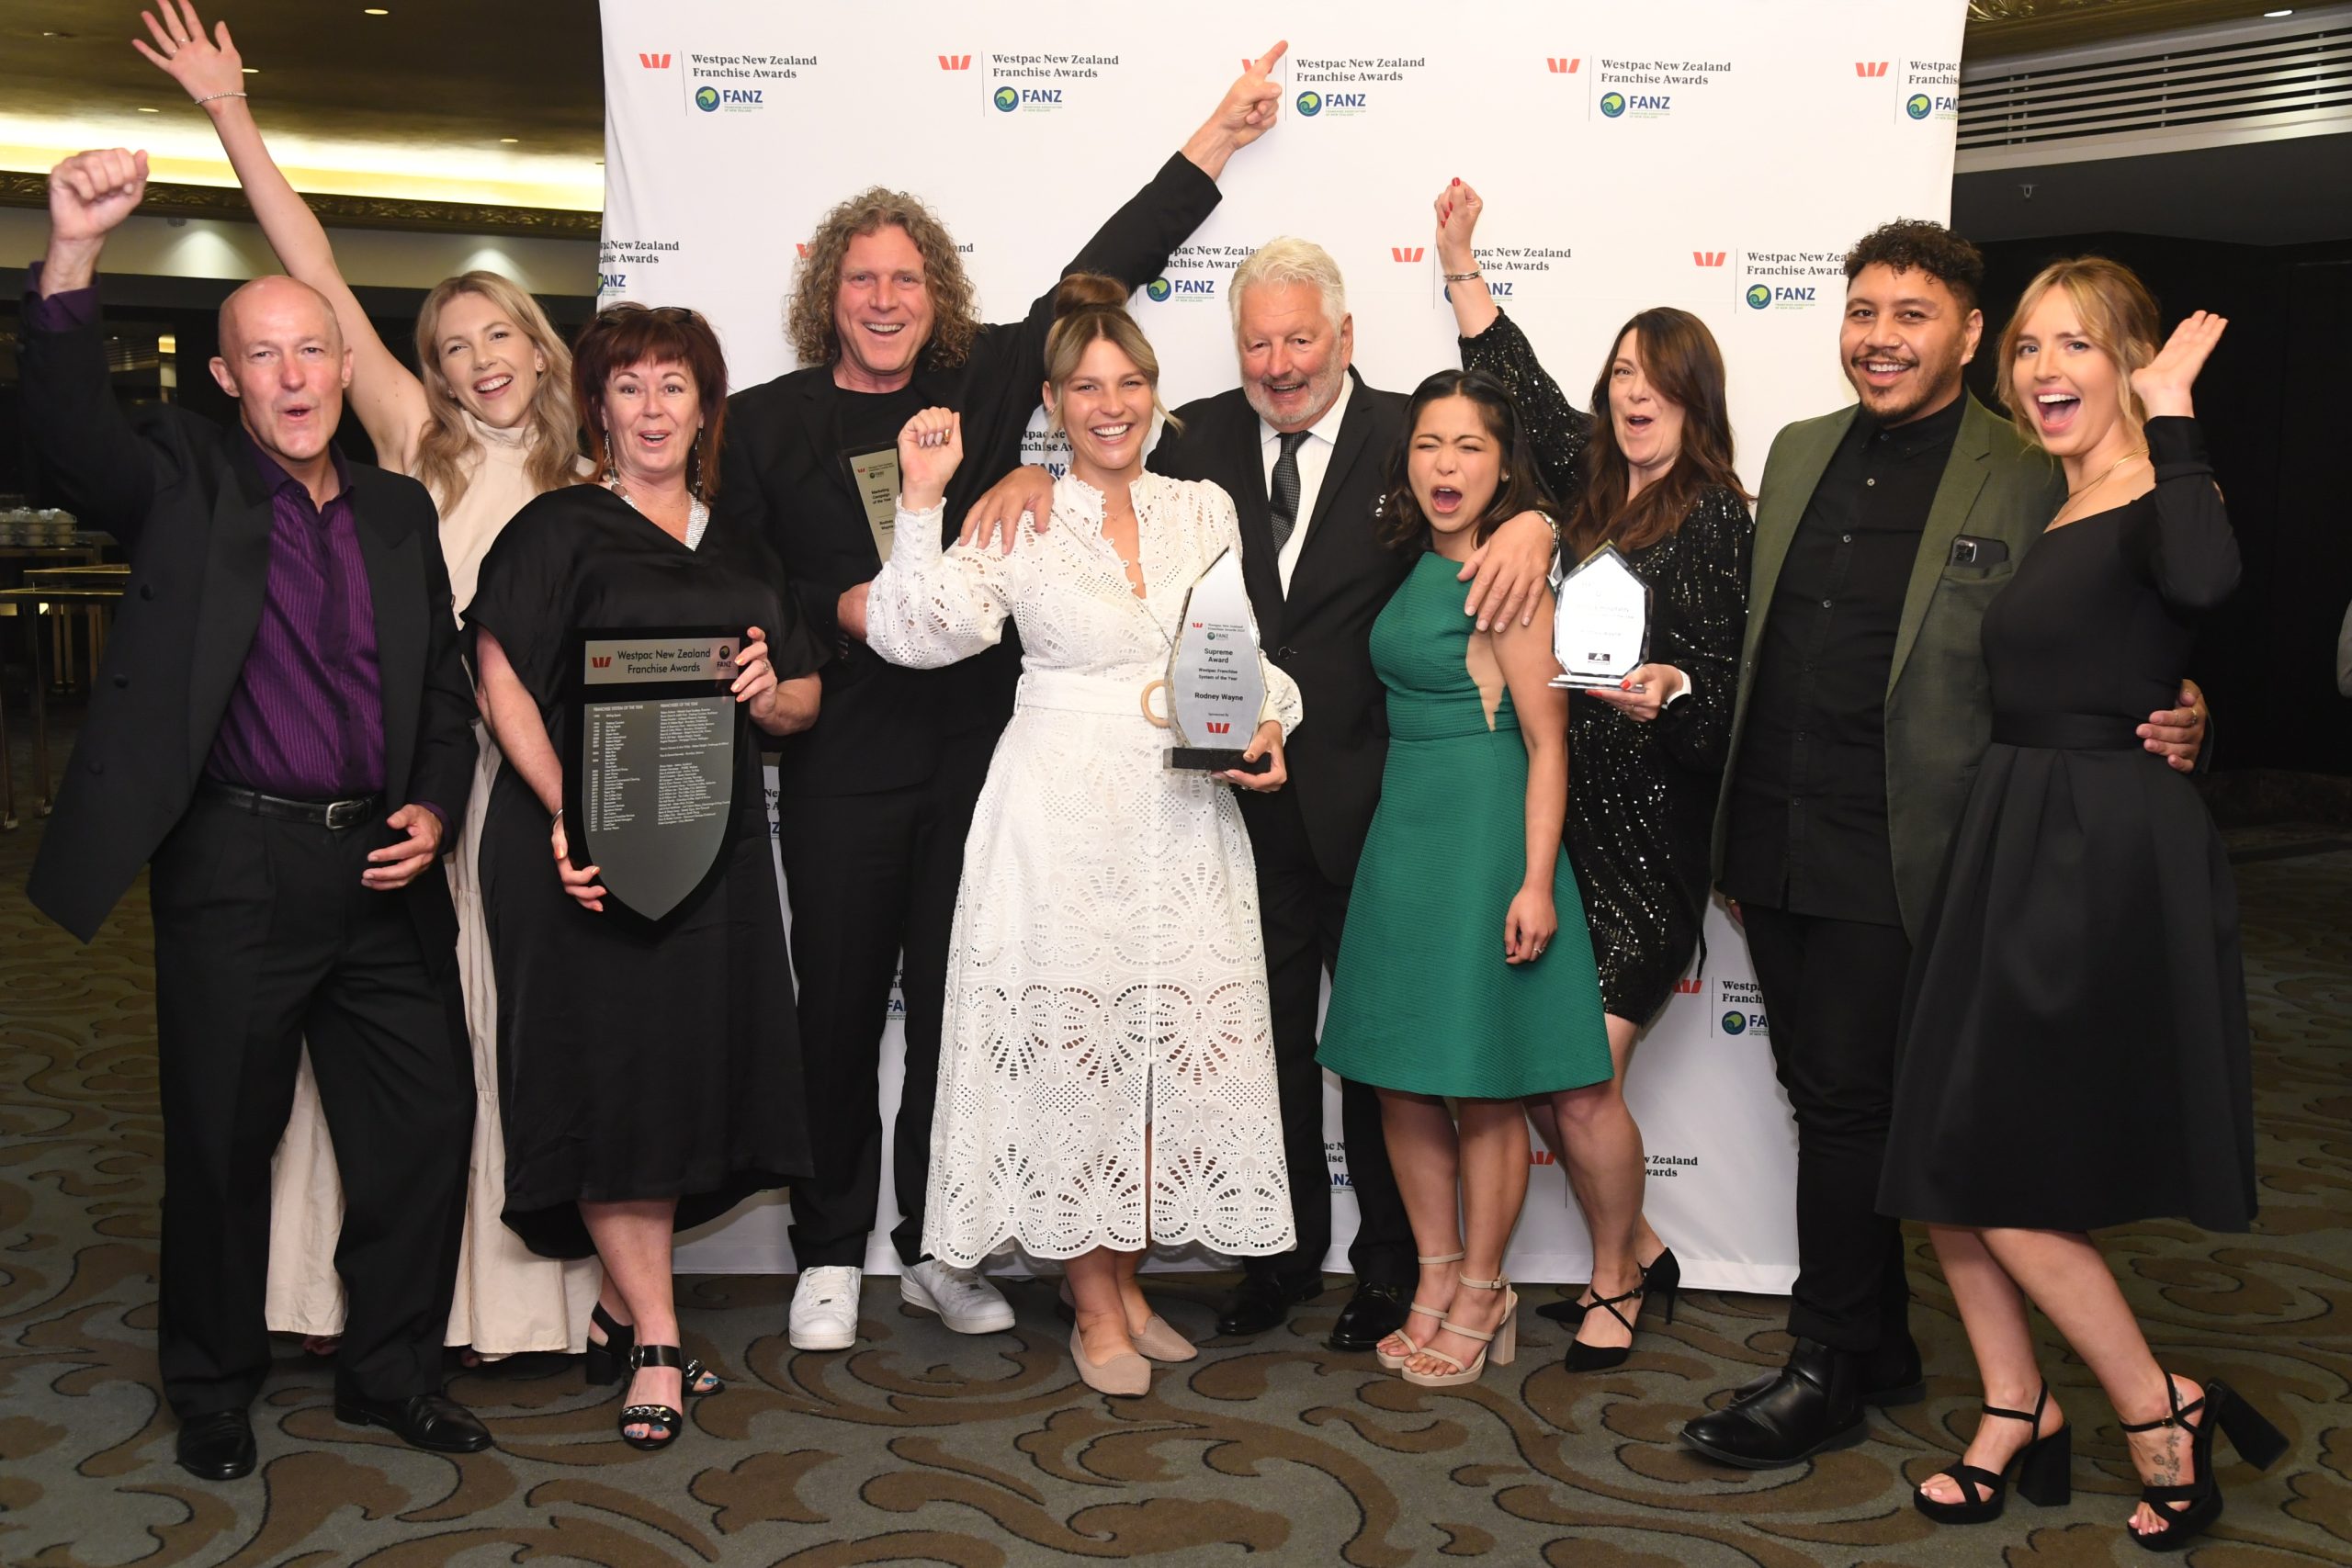 We were so lucky to achieve a hat-trick of wins at the Westpac New Zealand Franchise Awards